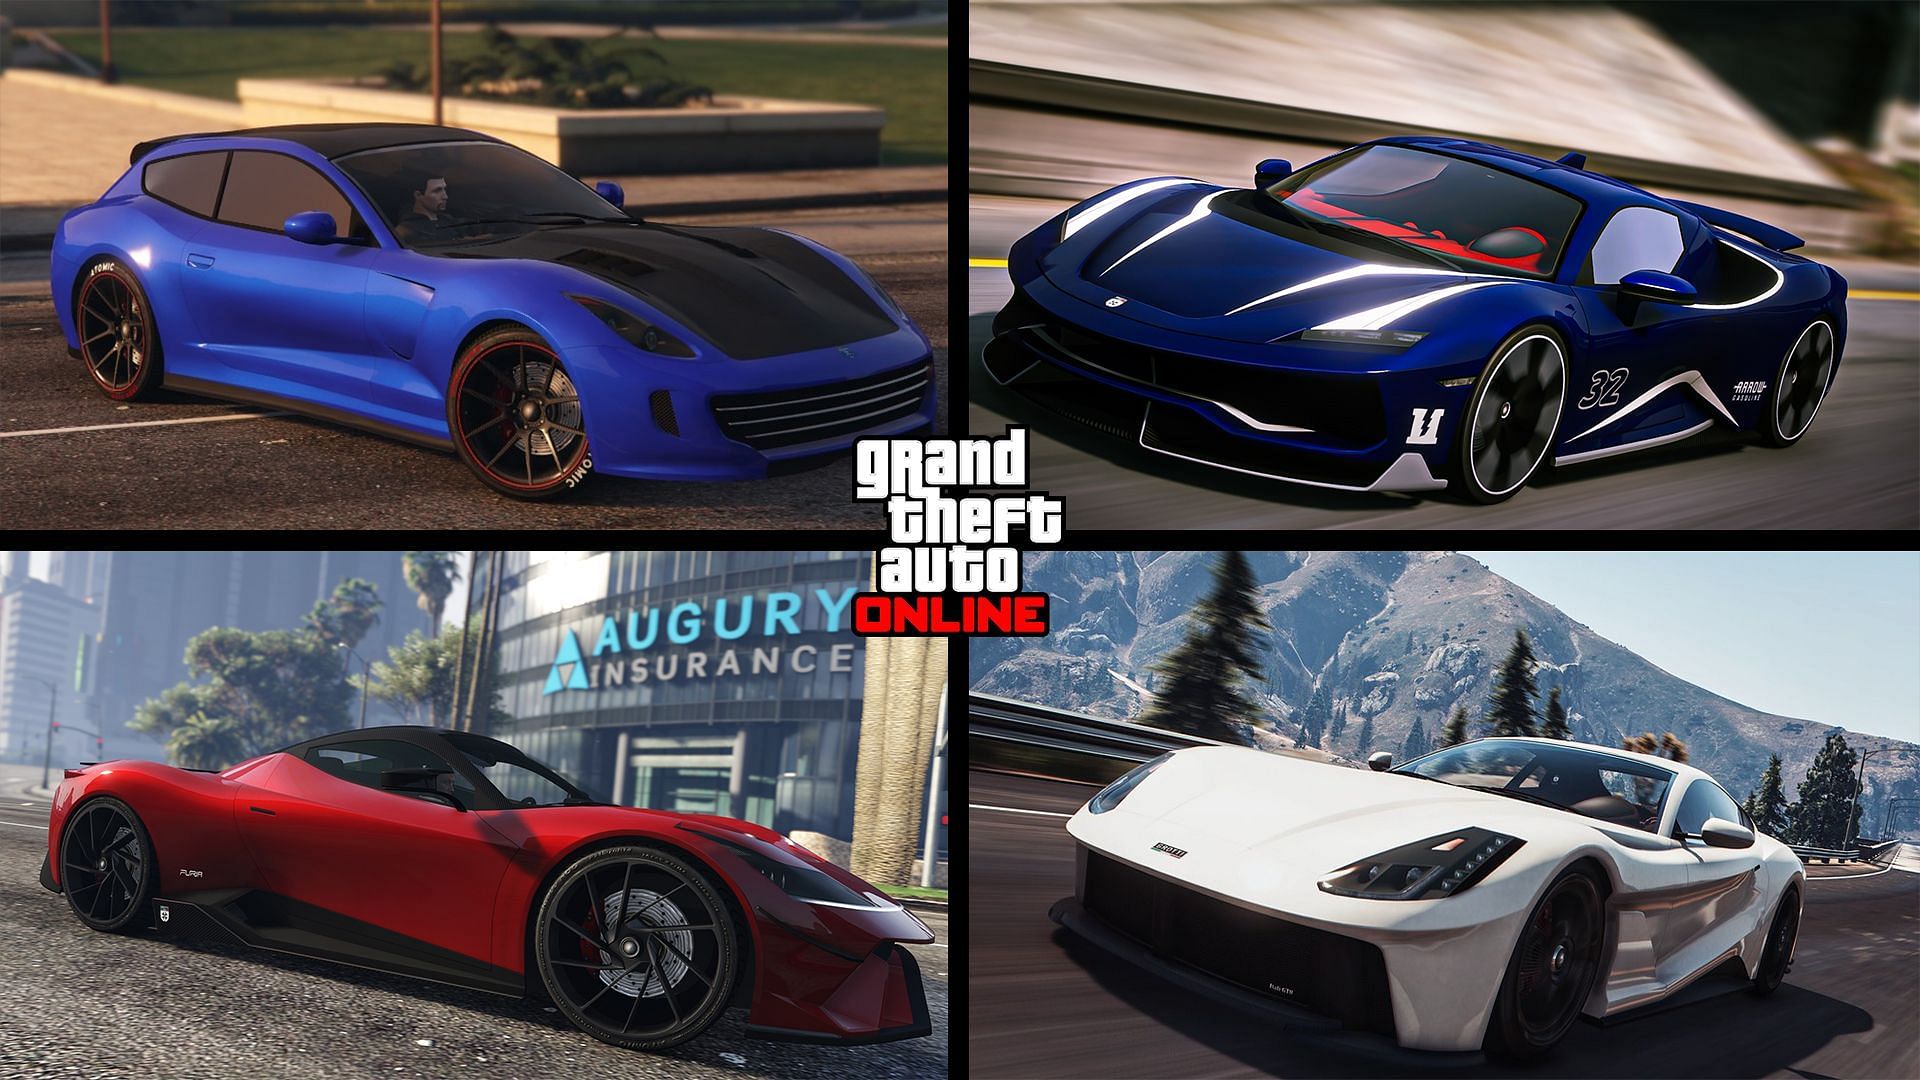 Here's Four Very Cool Corvette Knock-Offs From GTA Online